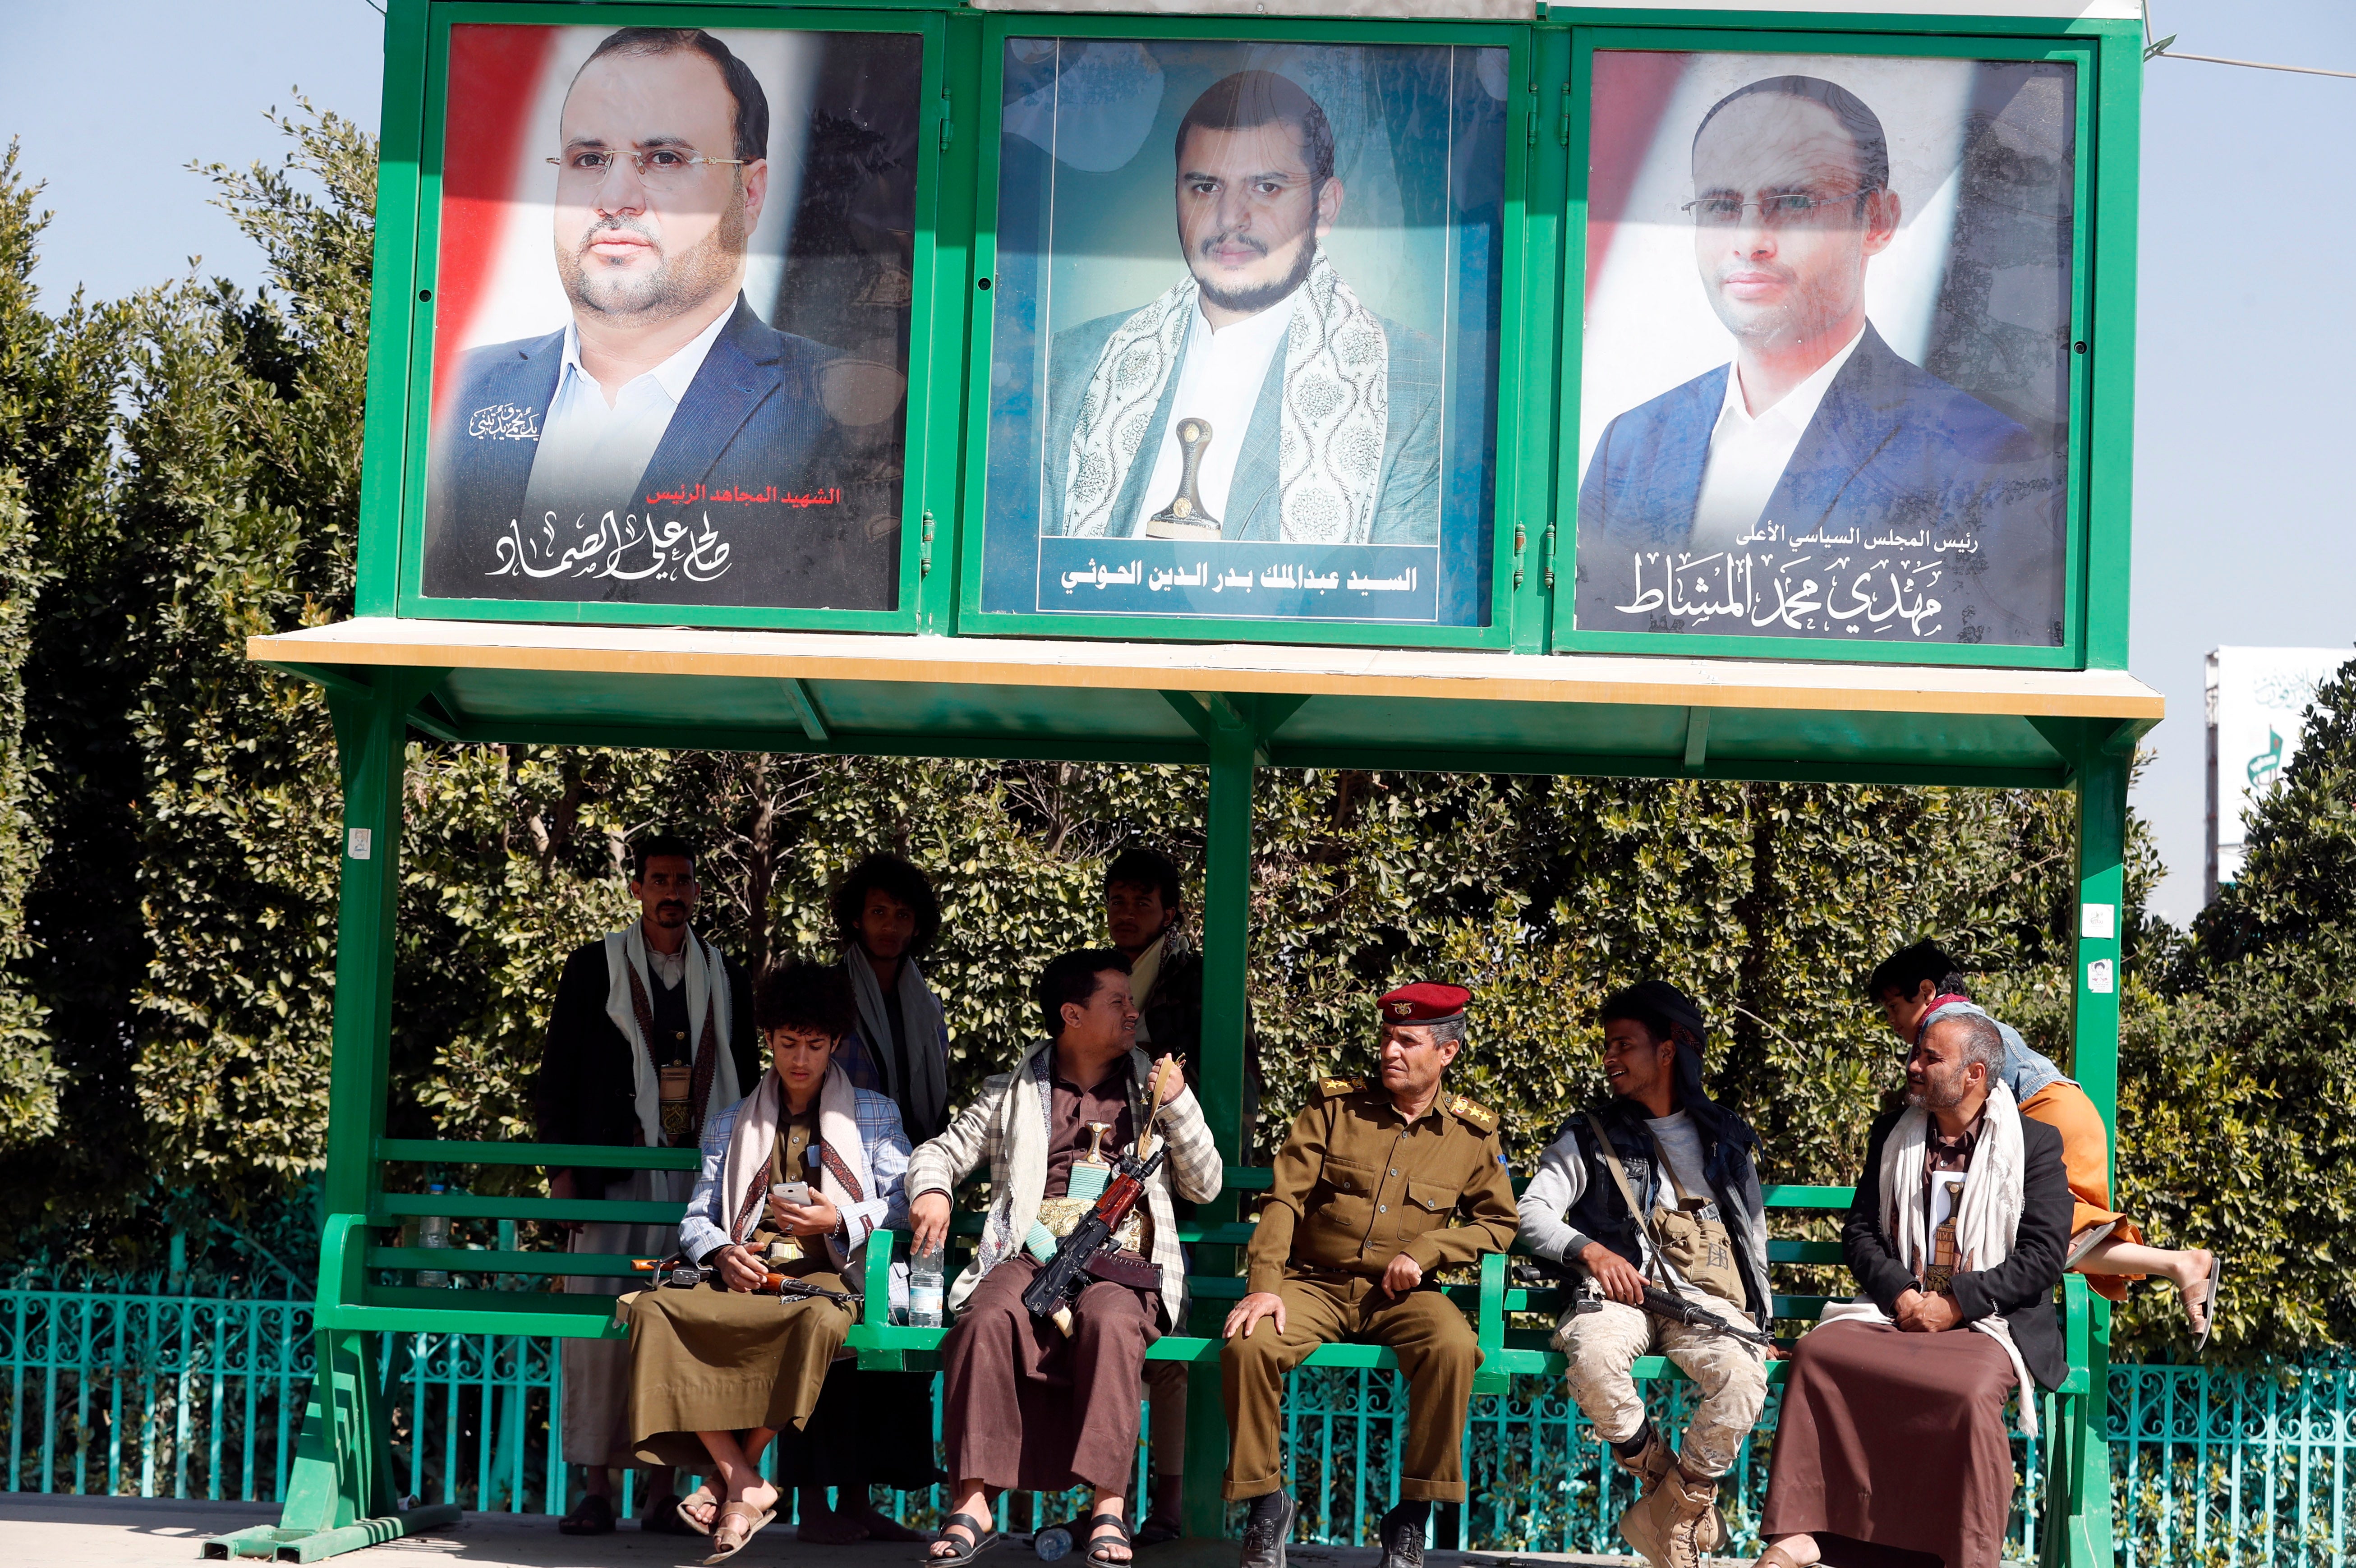 Armed militiamen and supporters of the Houthi movement sit under portraits of top Houthi leaders